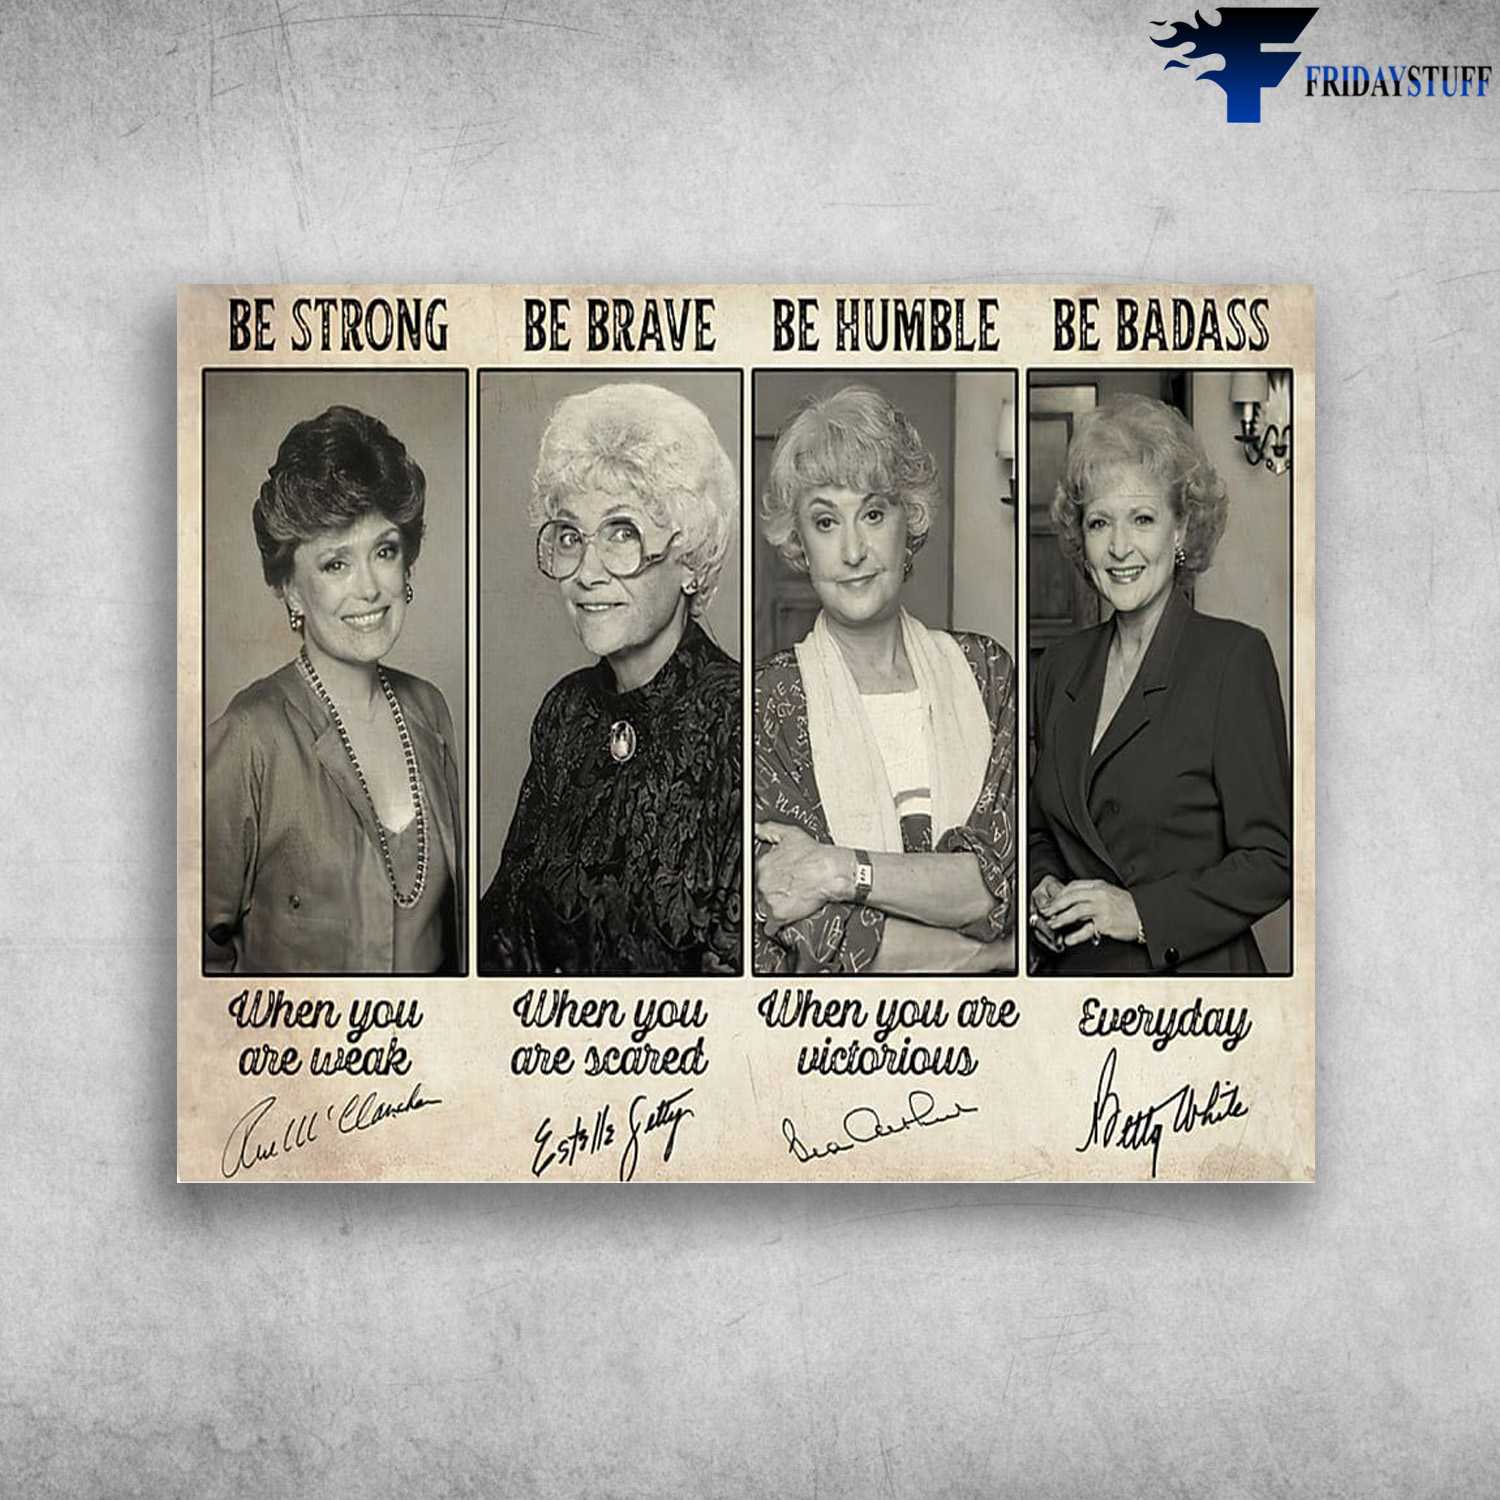 Feminist Poster, Be Strong When You Are Weak, Be Brave When You Are Scared, Be Humble When You Are Victorious, Be Badass Everyday